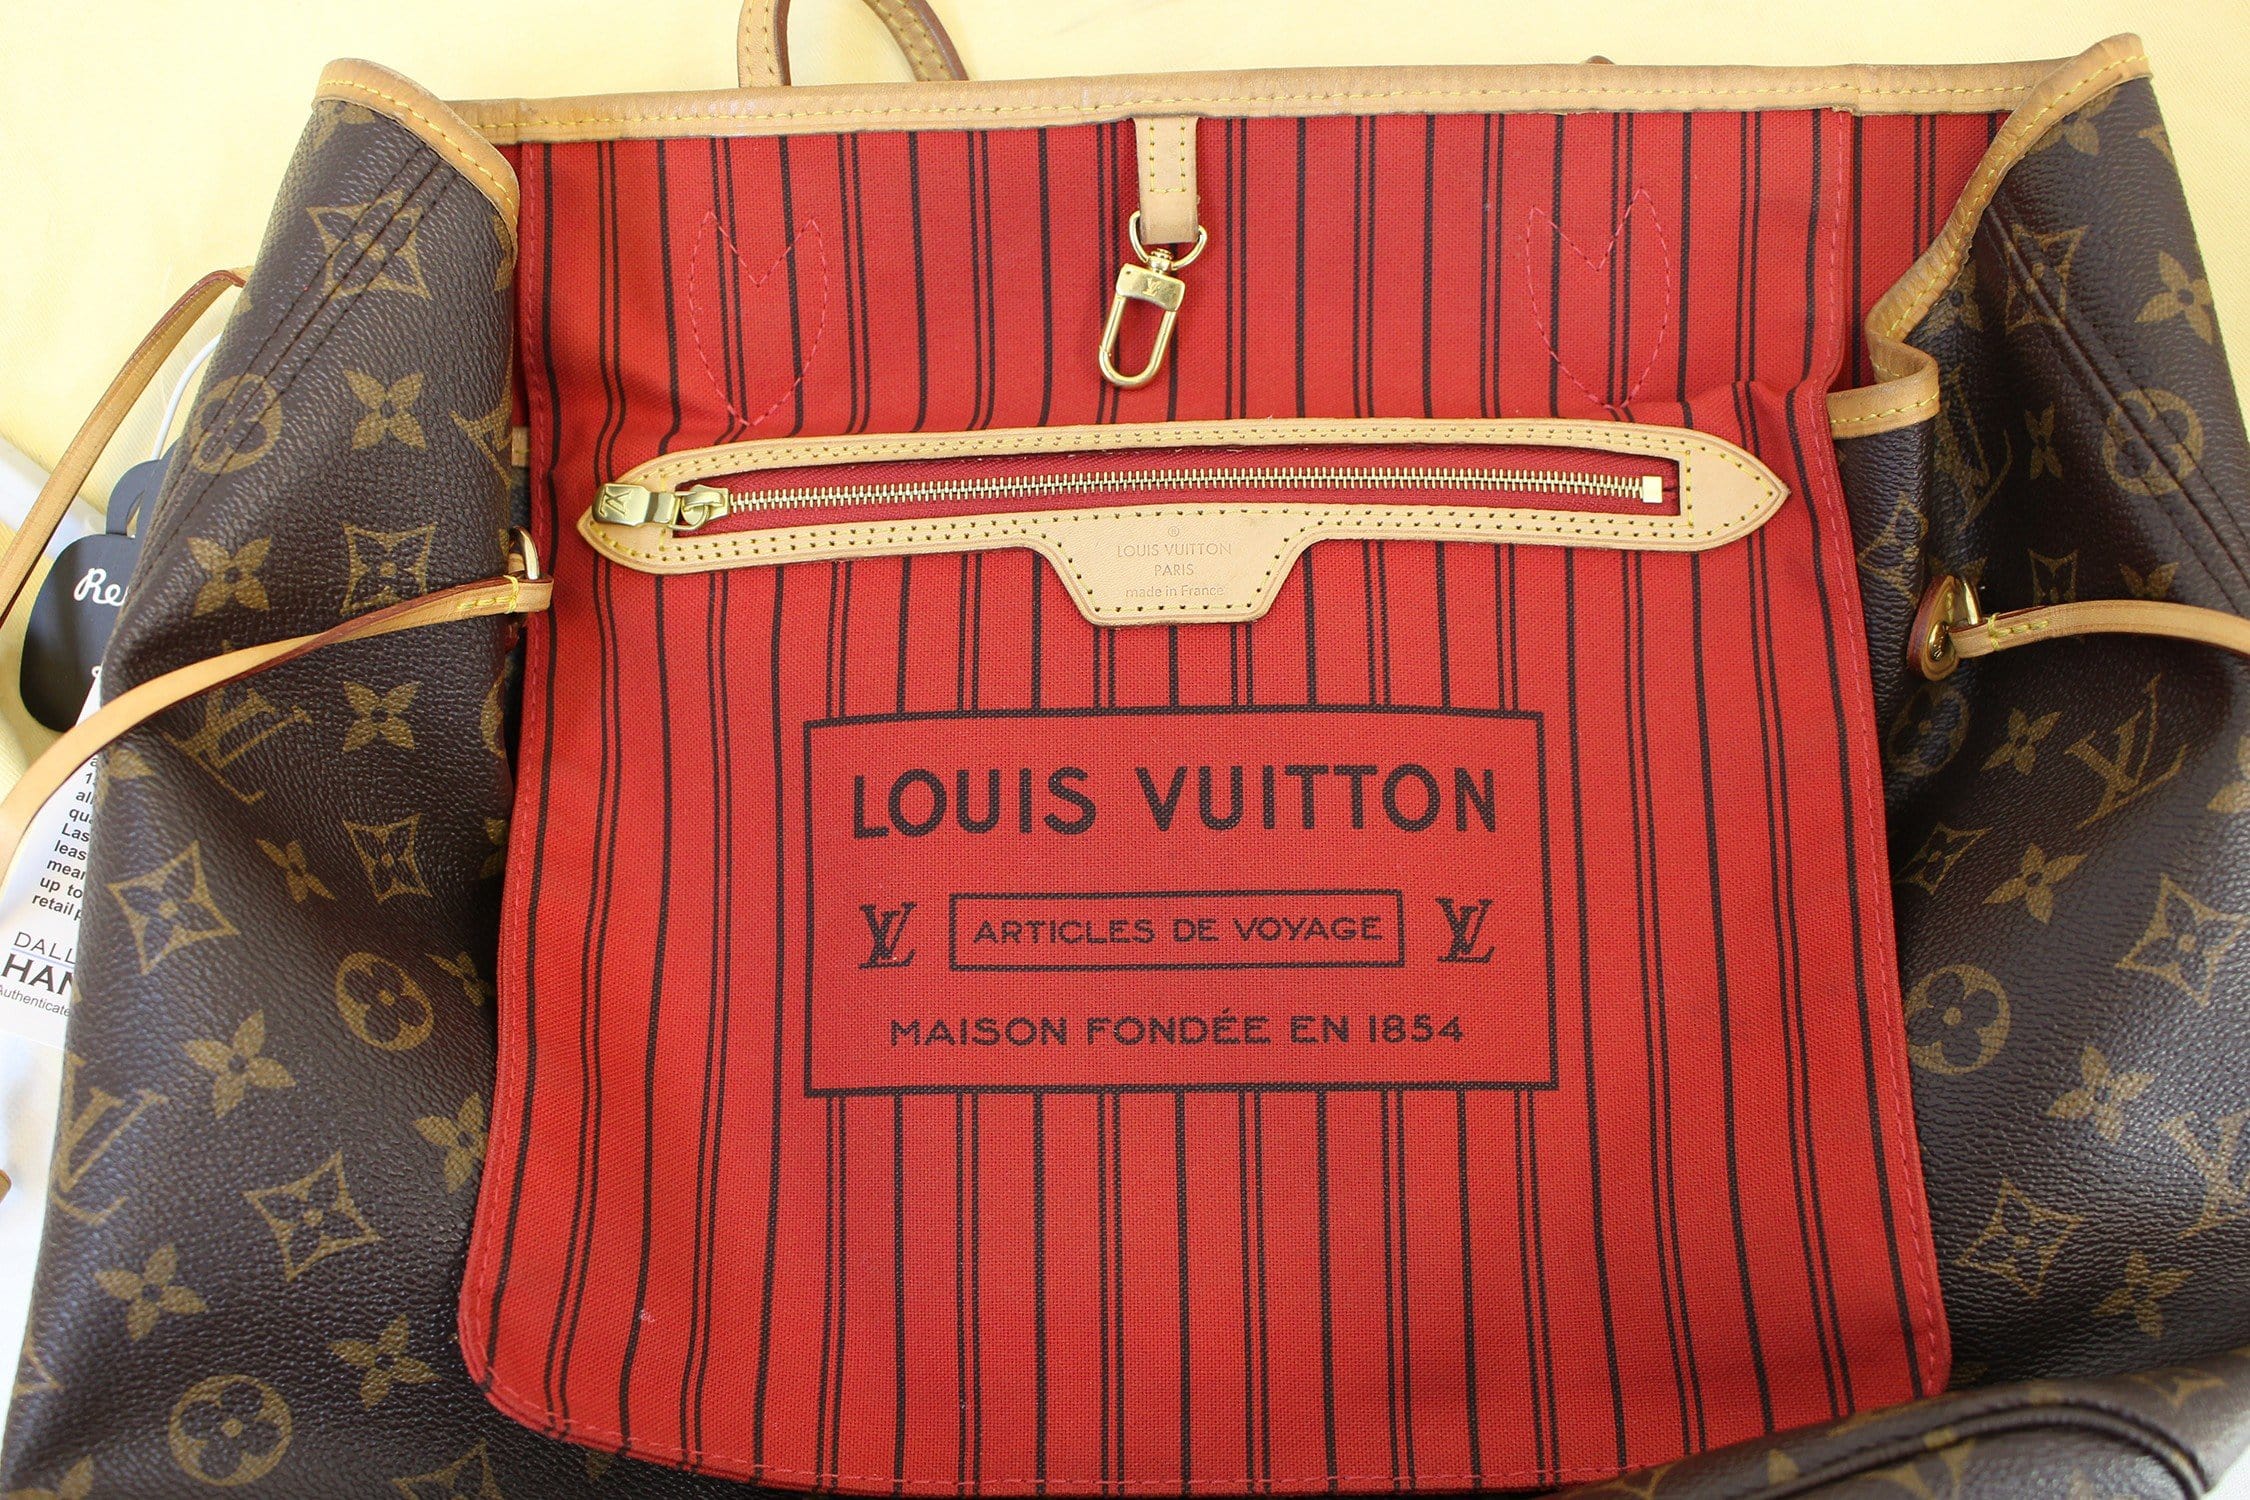 Louis Vuitton - Authenticated Neverfull Handbag - Leather Red Plain for Women, Never Worn, with Tag